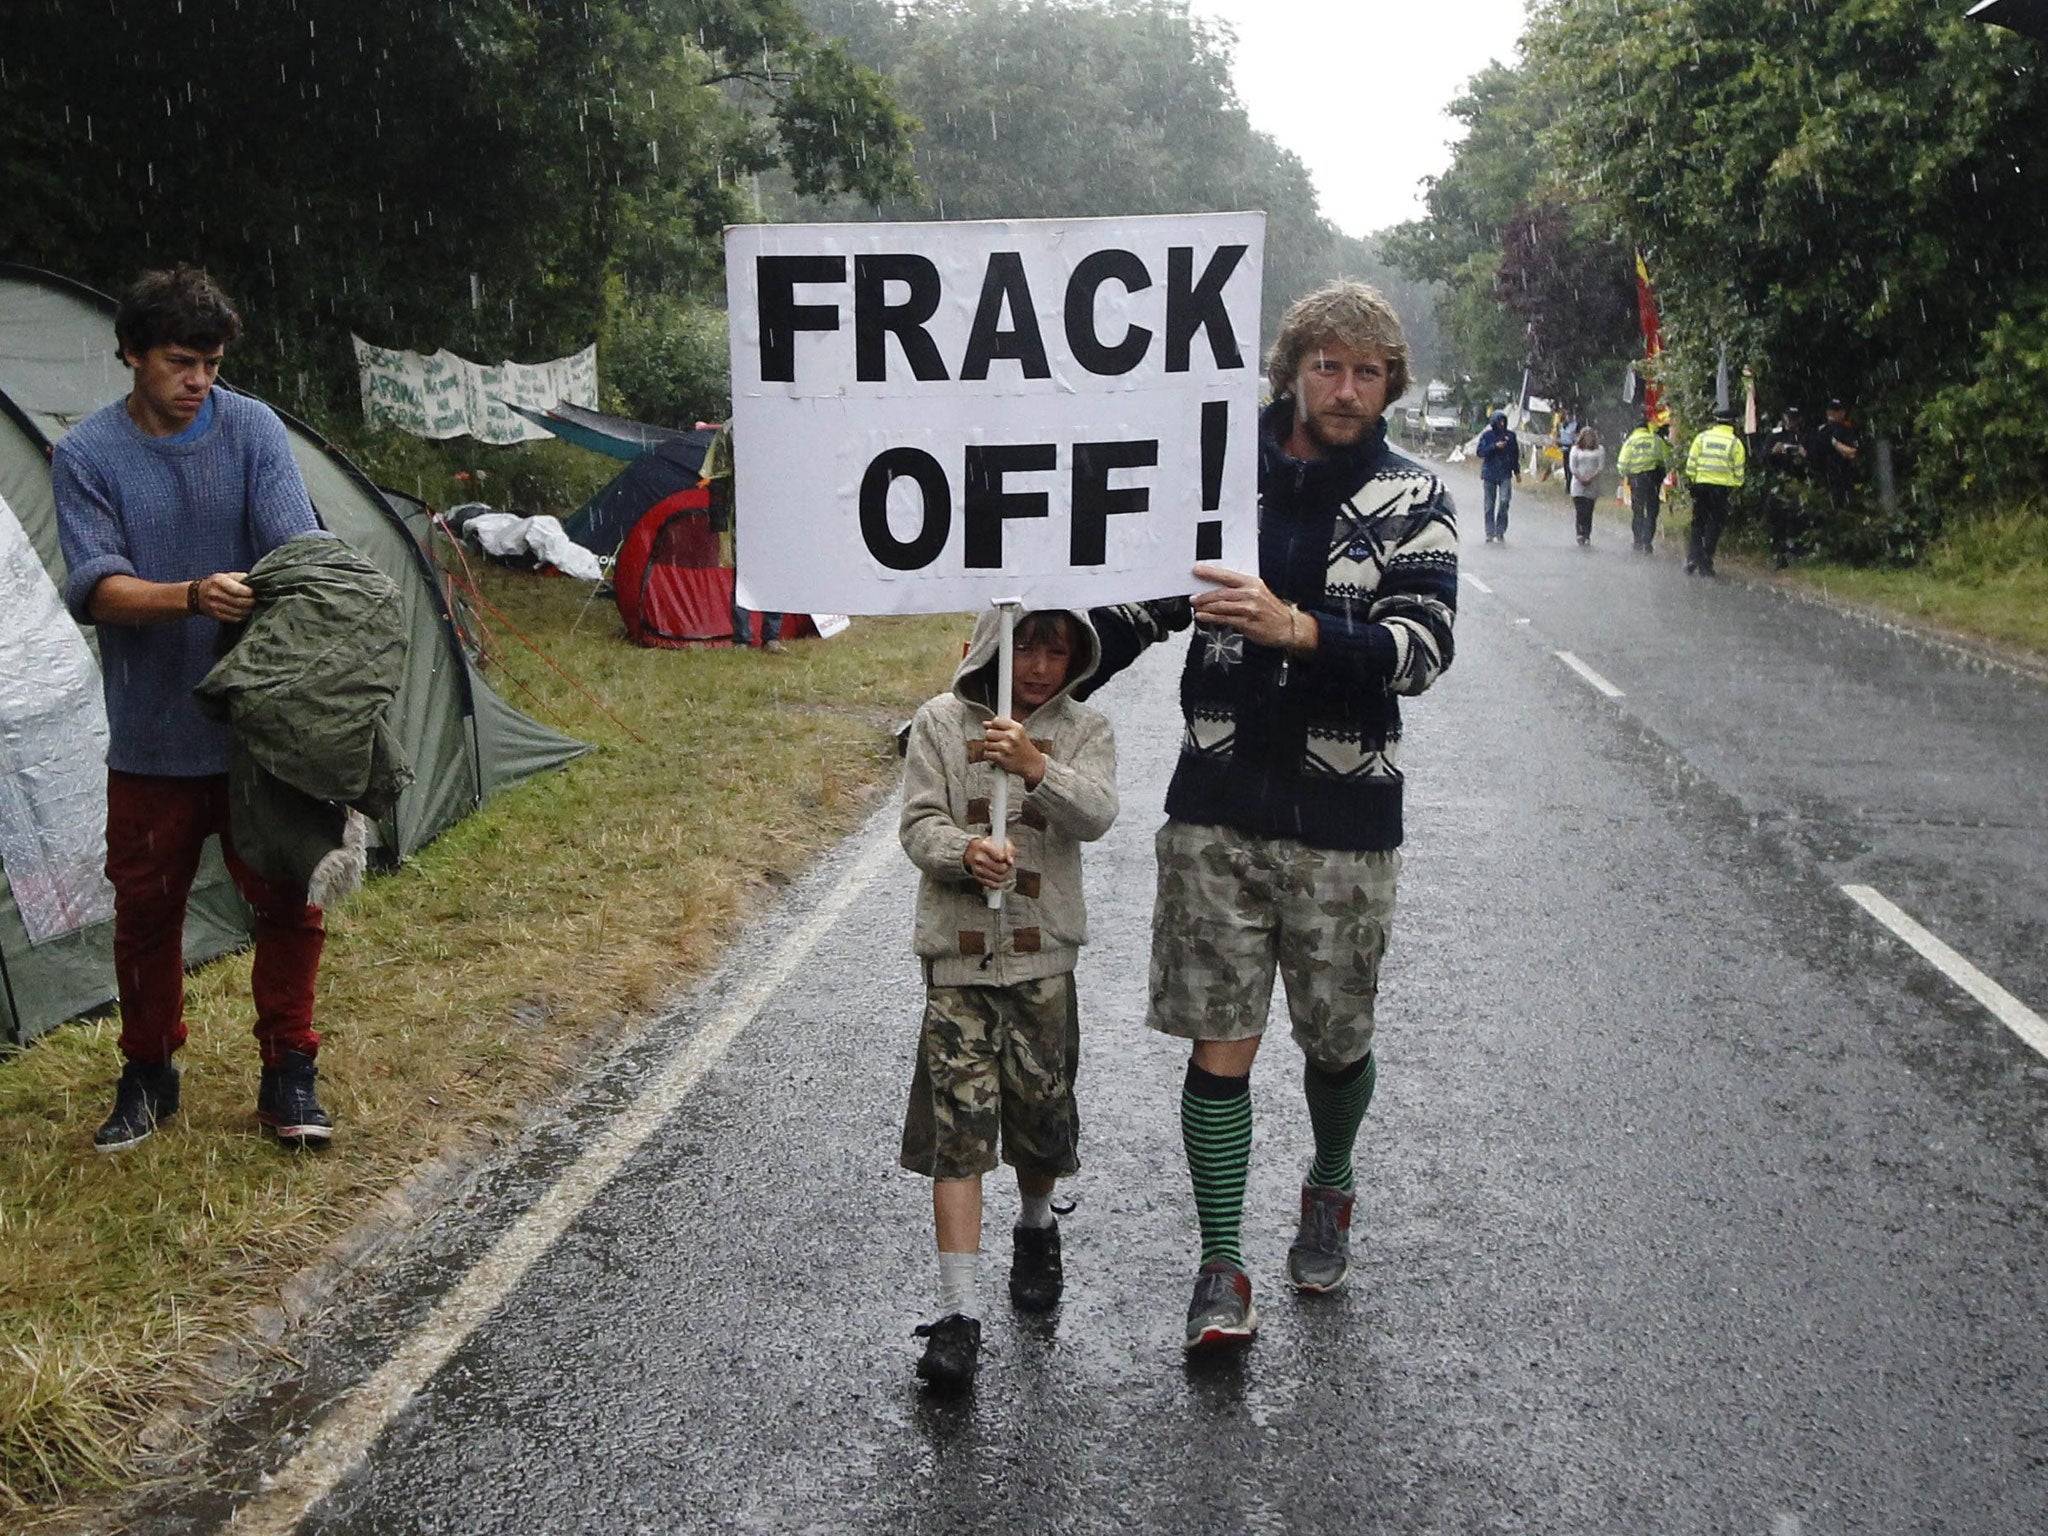 Protests over drilling in Balcombe, West Sussex, earlier this year